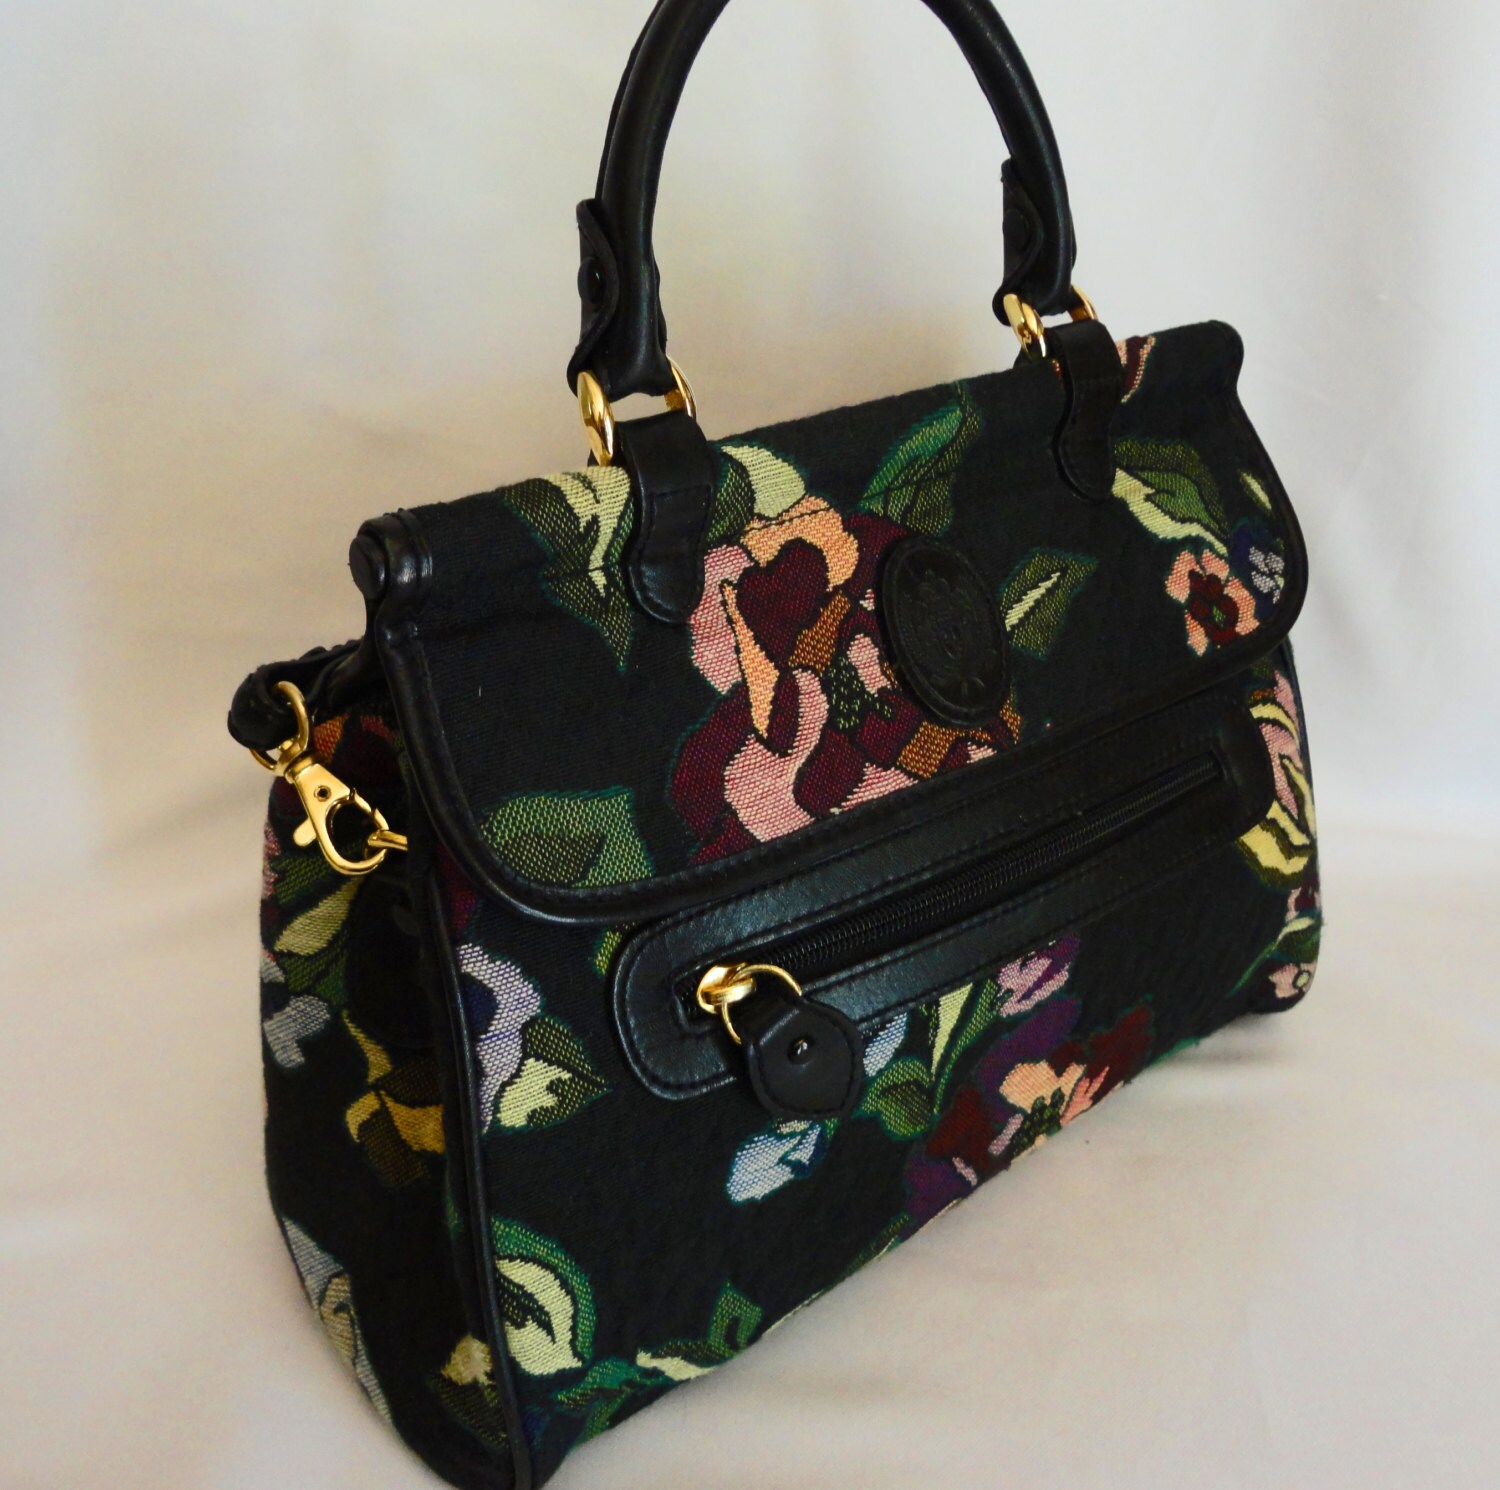 Liz Claiborne Floral Tapestry and Leather Cross-body Handbag